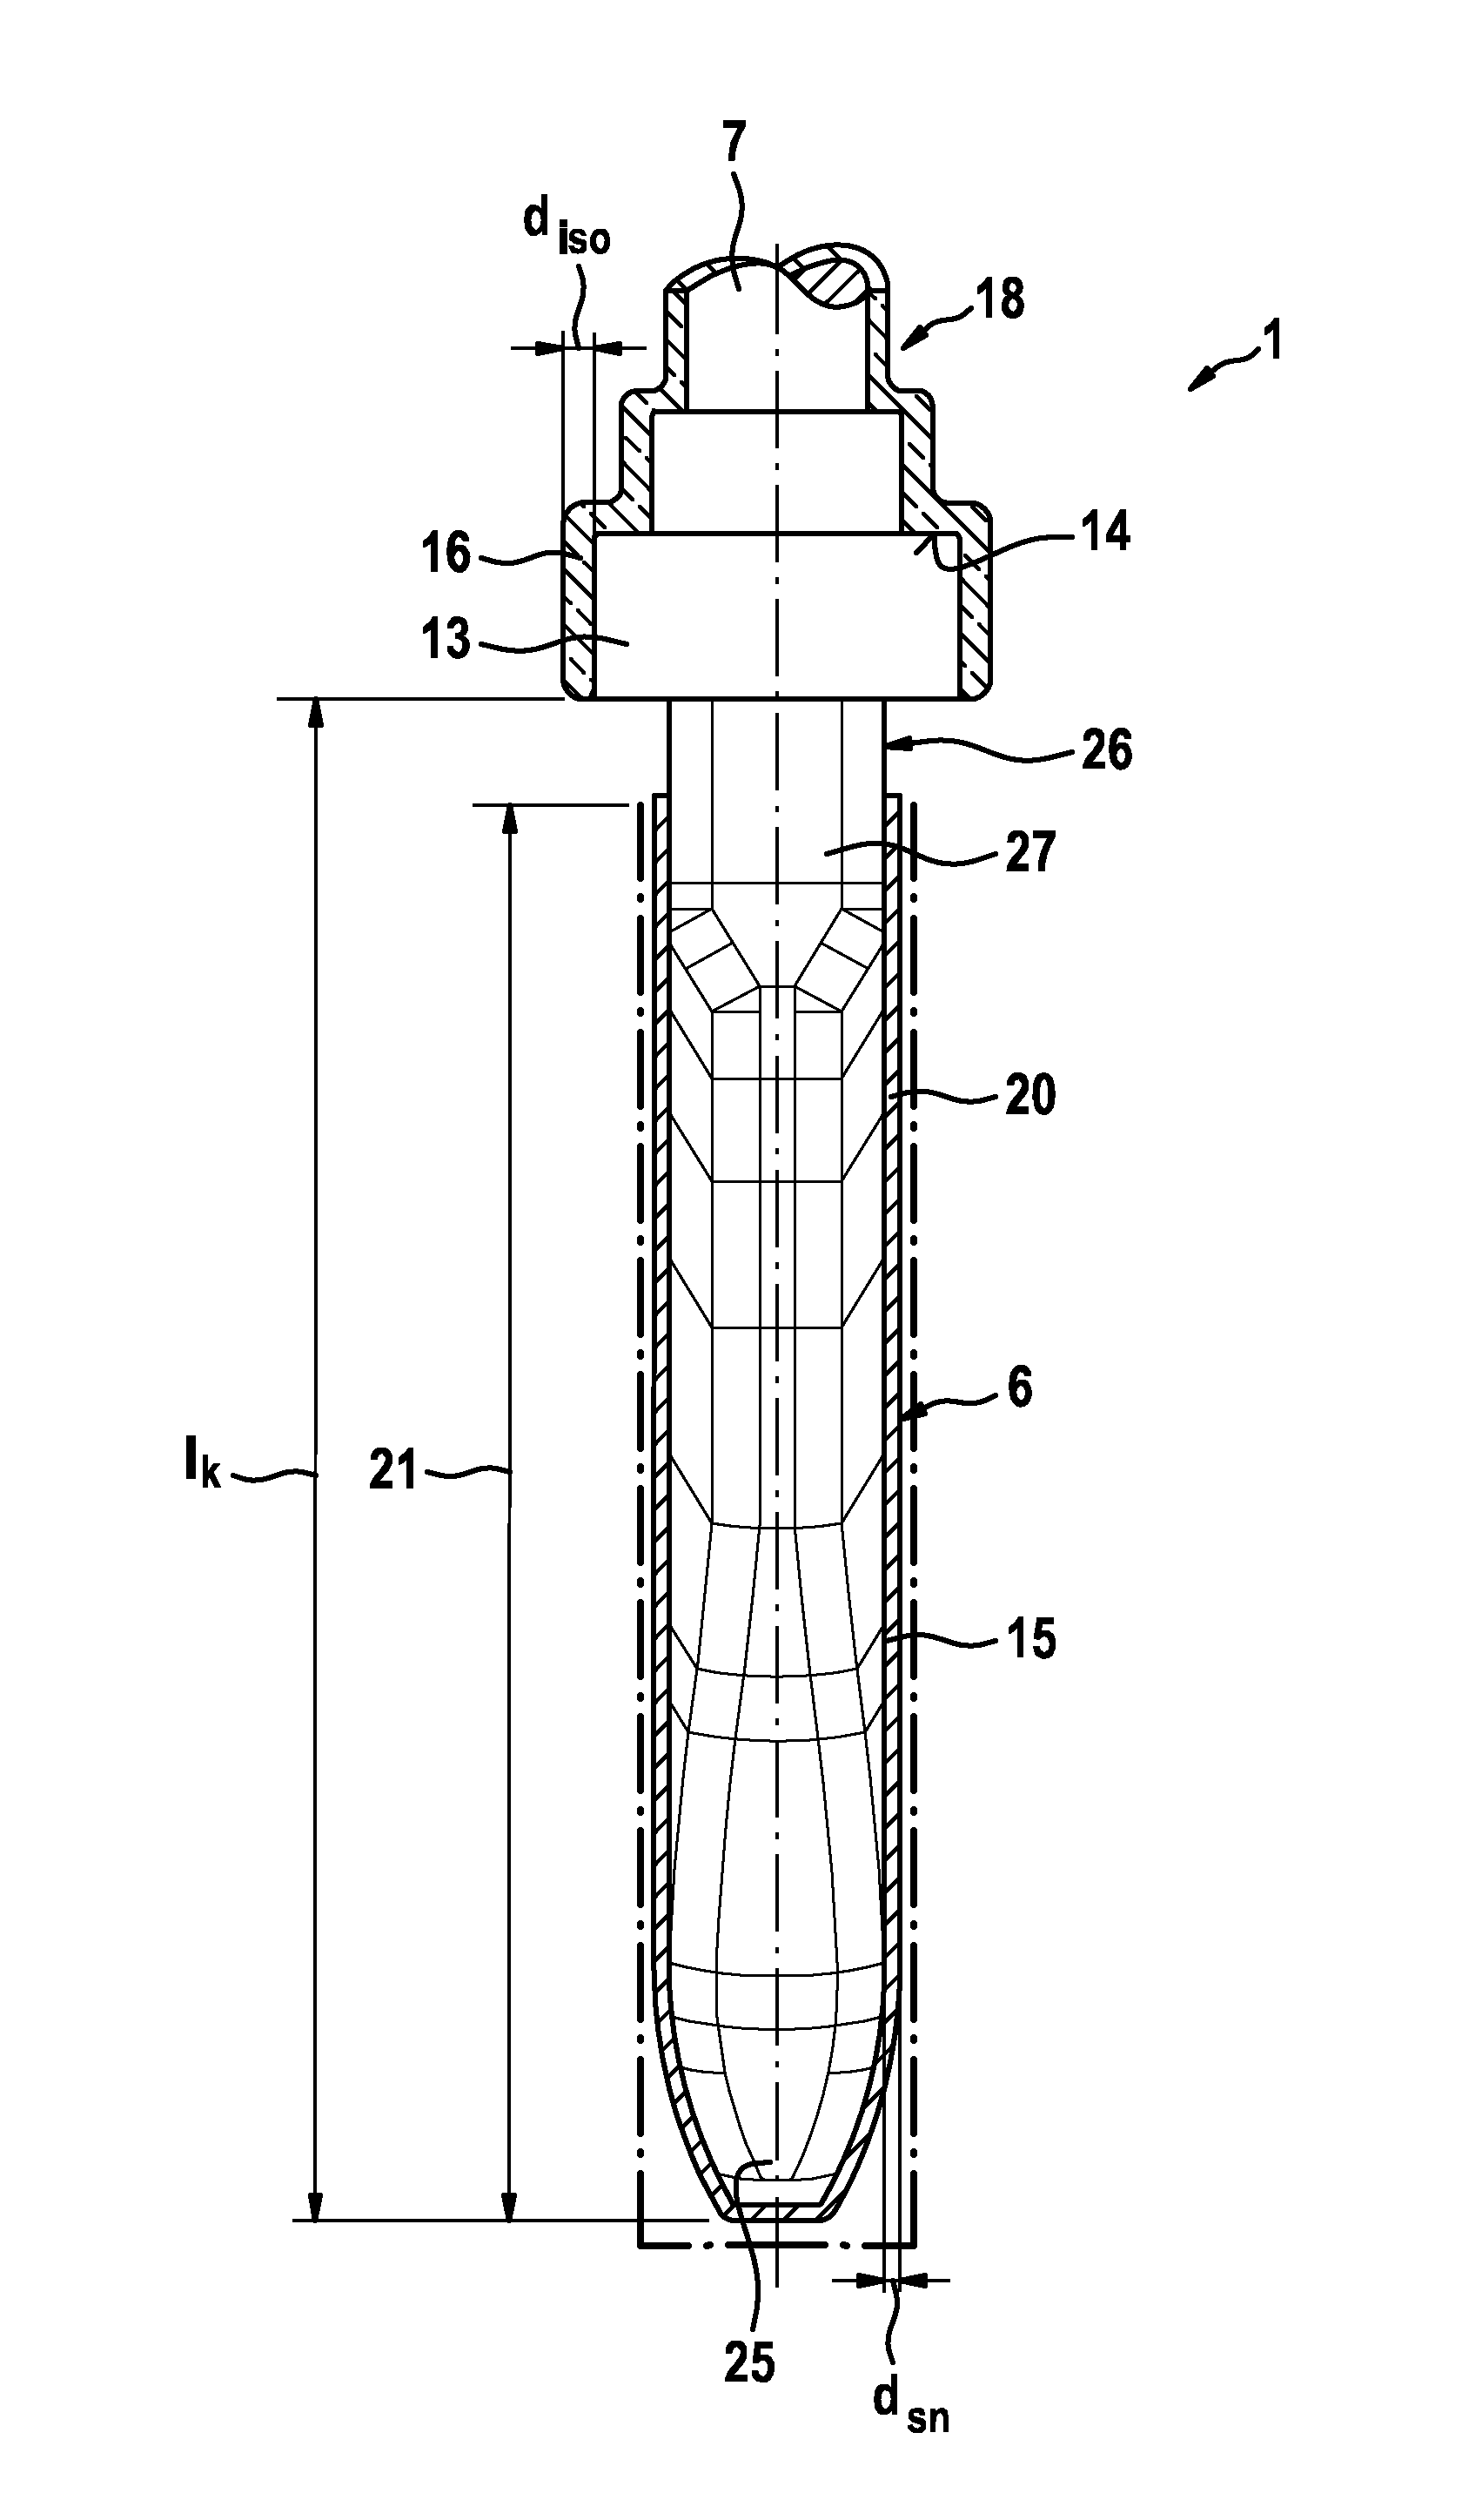 Press-in pin for an electrical press-in connection between an electronic component and a substrate plate